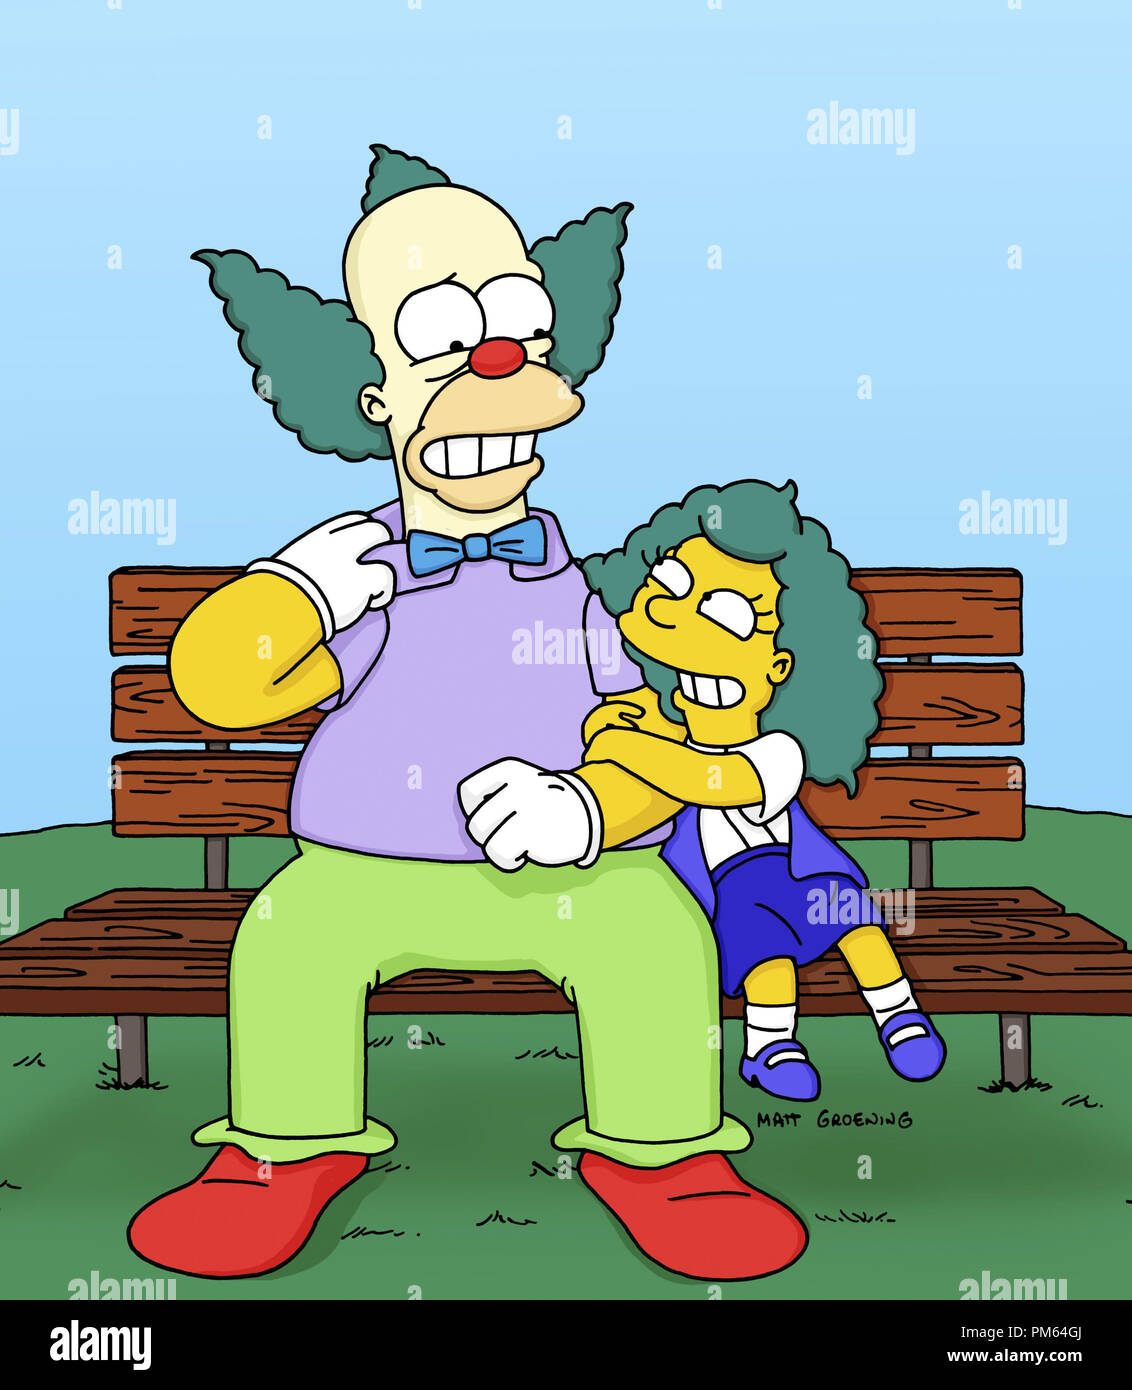 Film Still / Publicity Stills from 'The Simpsons' Episode: 'Insane Clown Poppy' Krusty the Clown, Sophie November 12, 2000 File Reference # 30846104THA  For Editorial Use Only -  All Rights Reserved Stock Photo